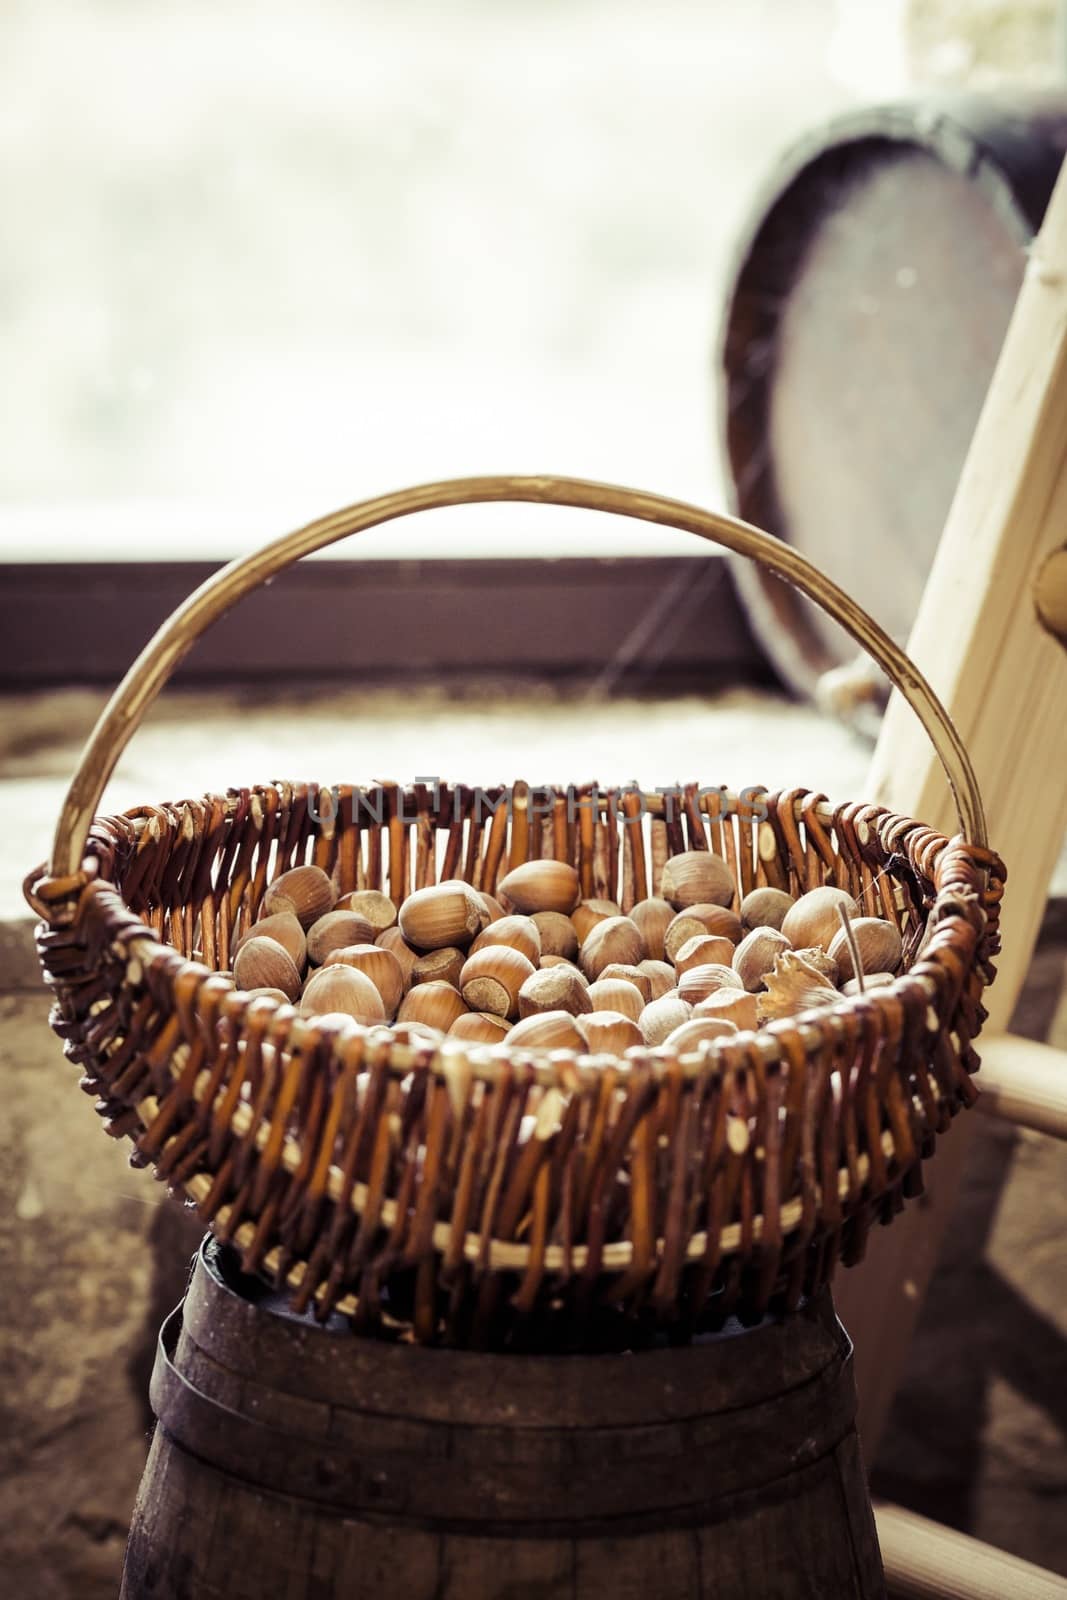 A basket of hazelnuts with a window in background.